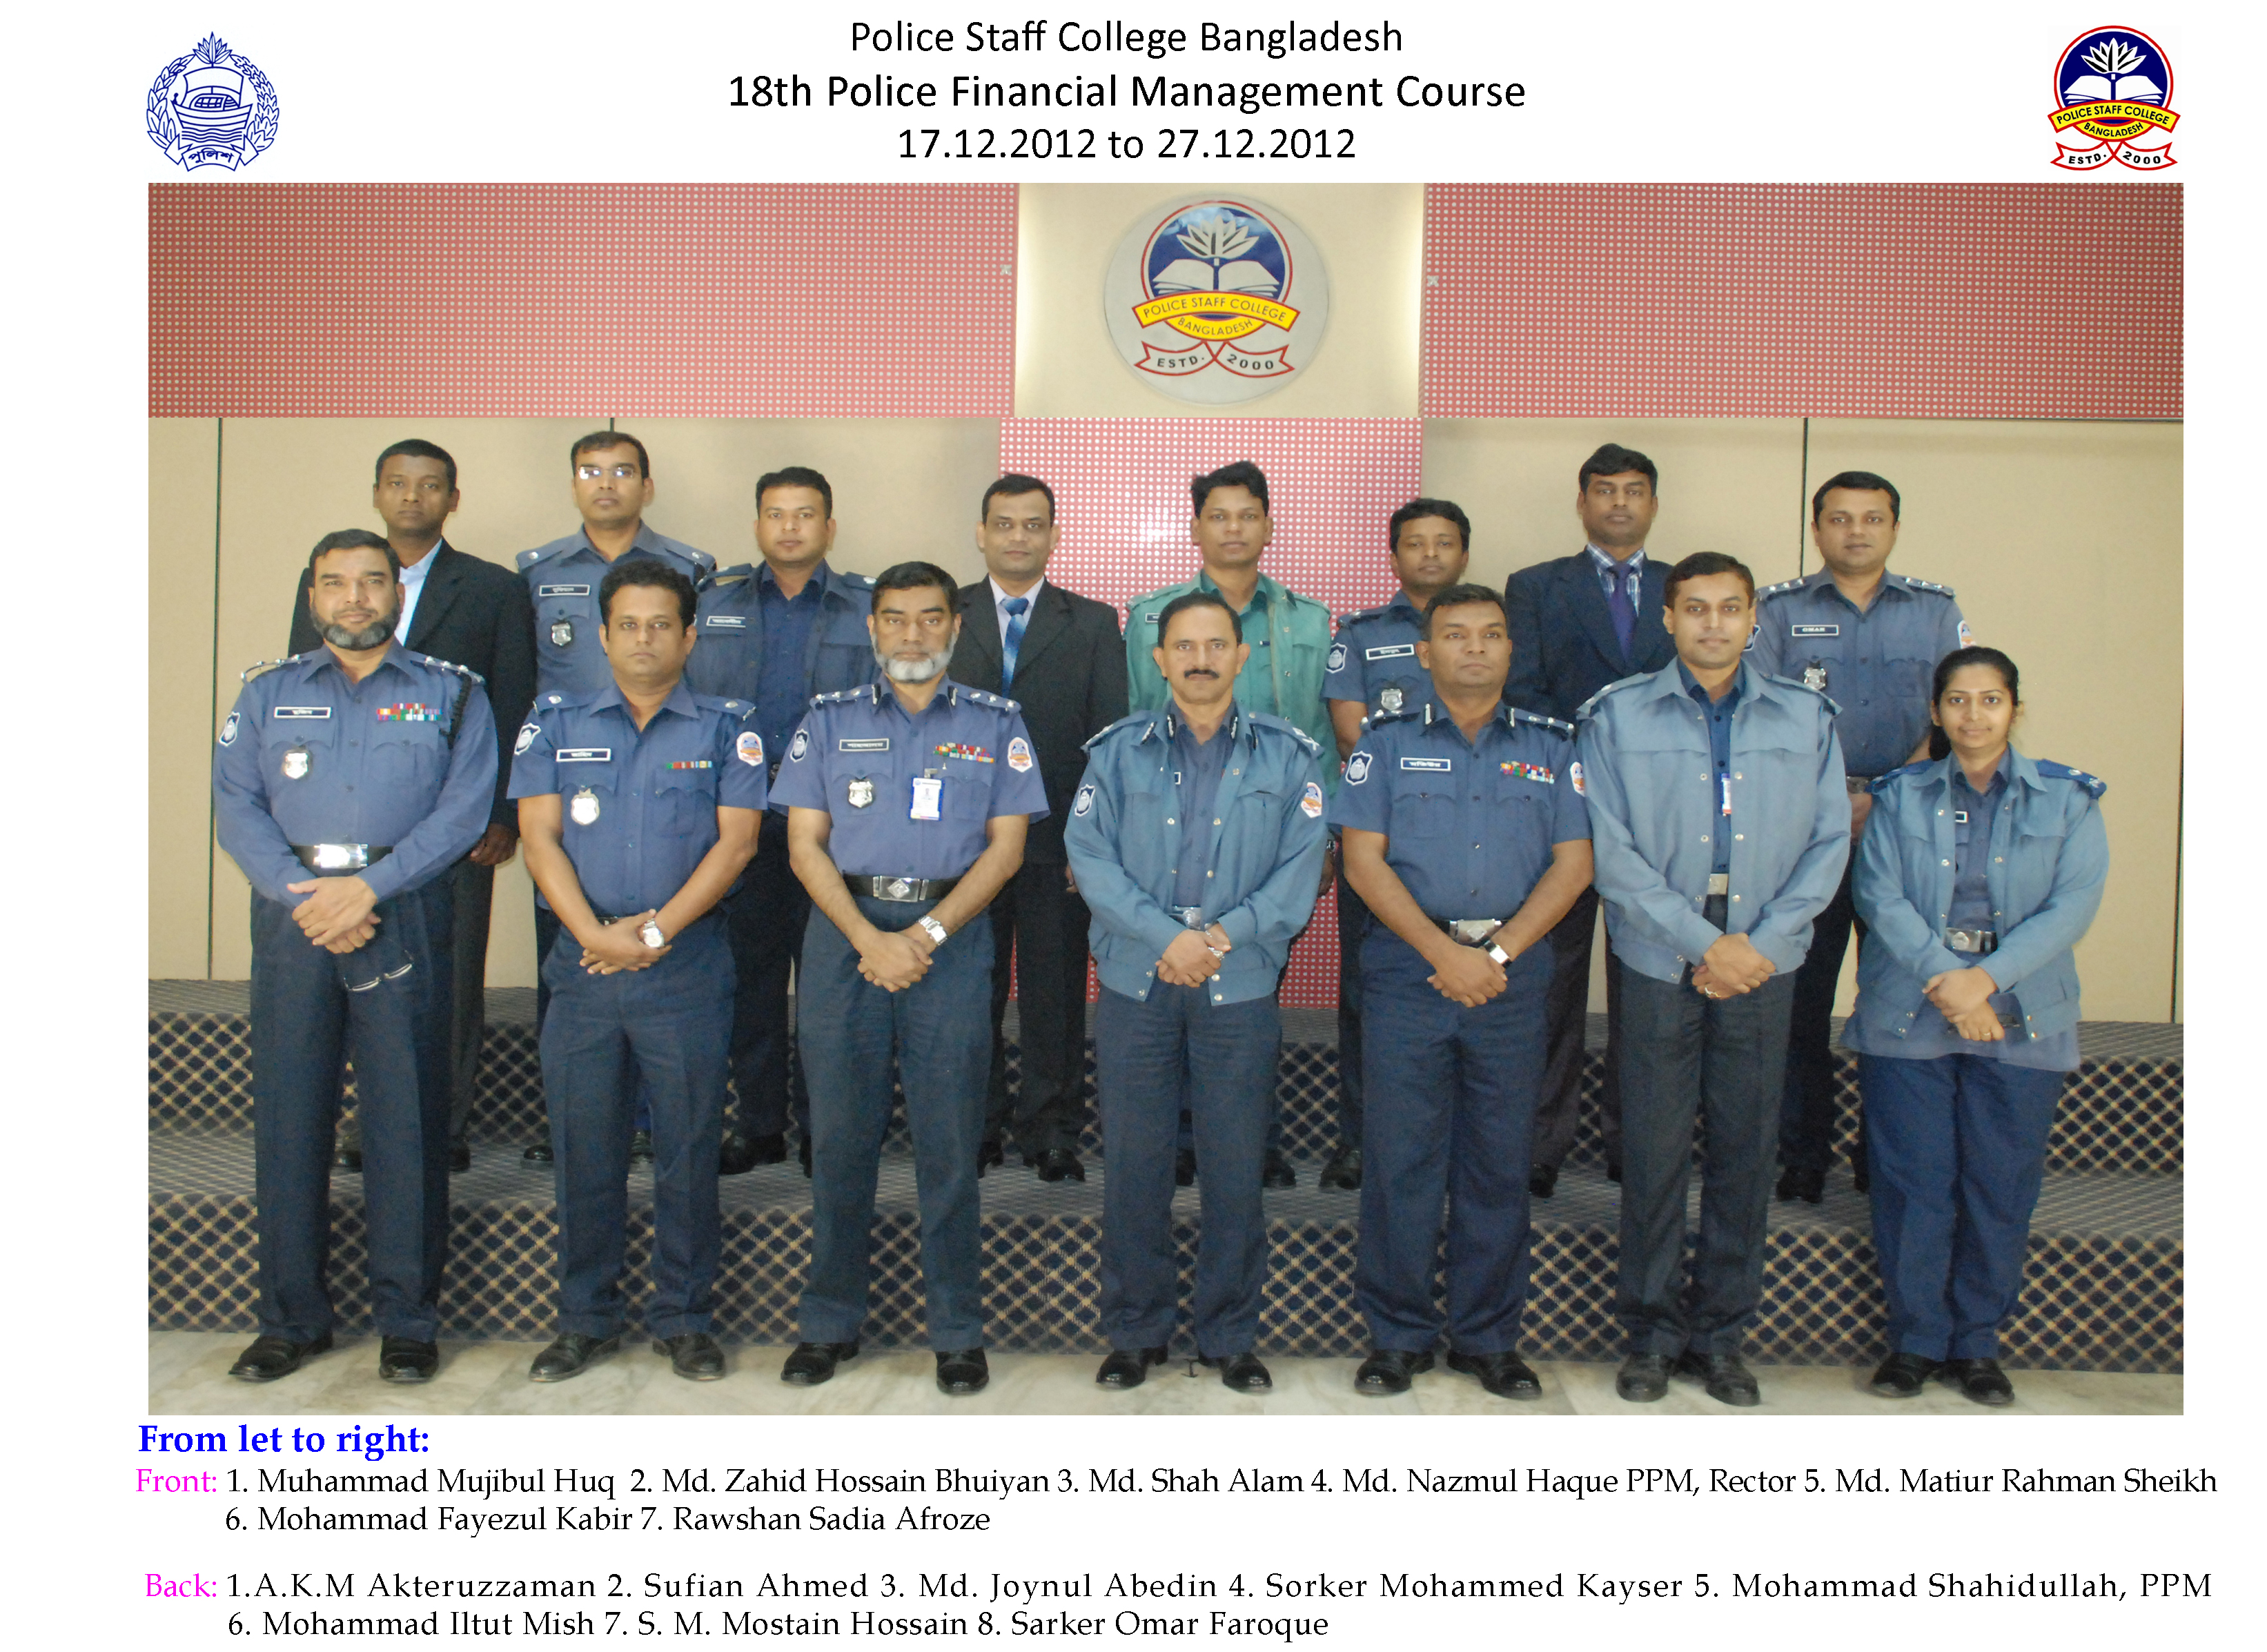 Police Staff College Bangladesh Endeavour for Excellence